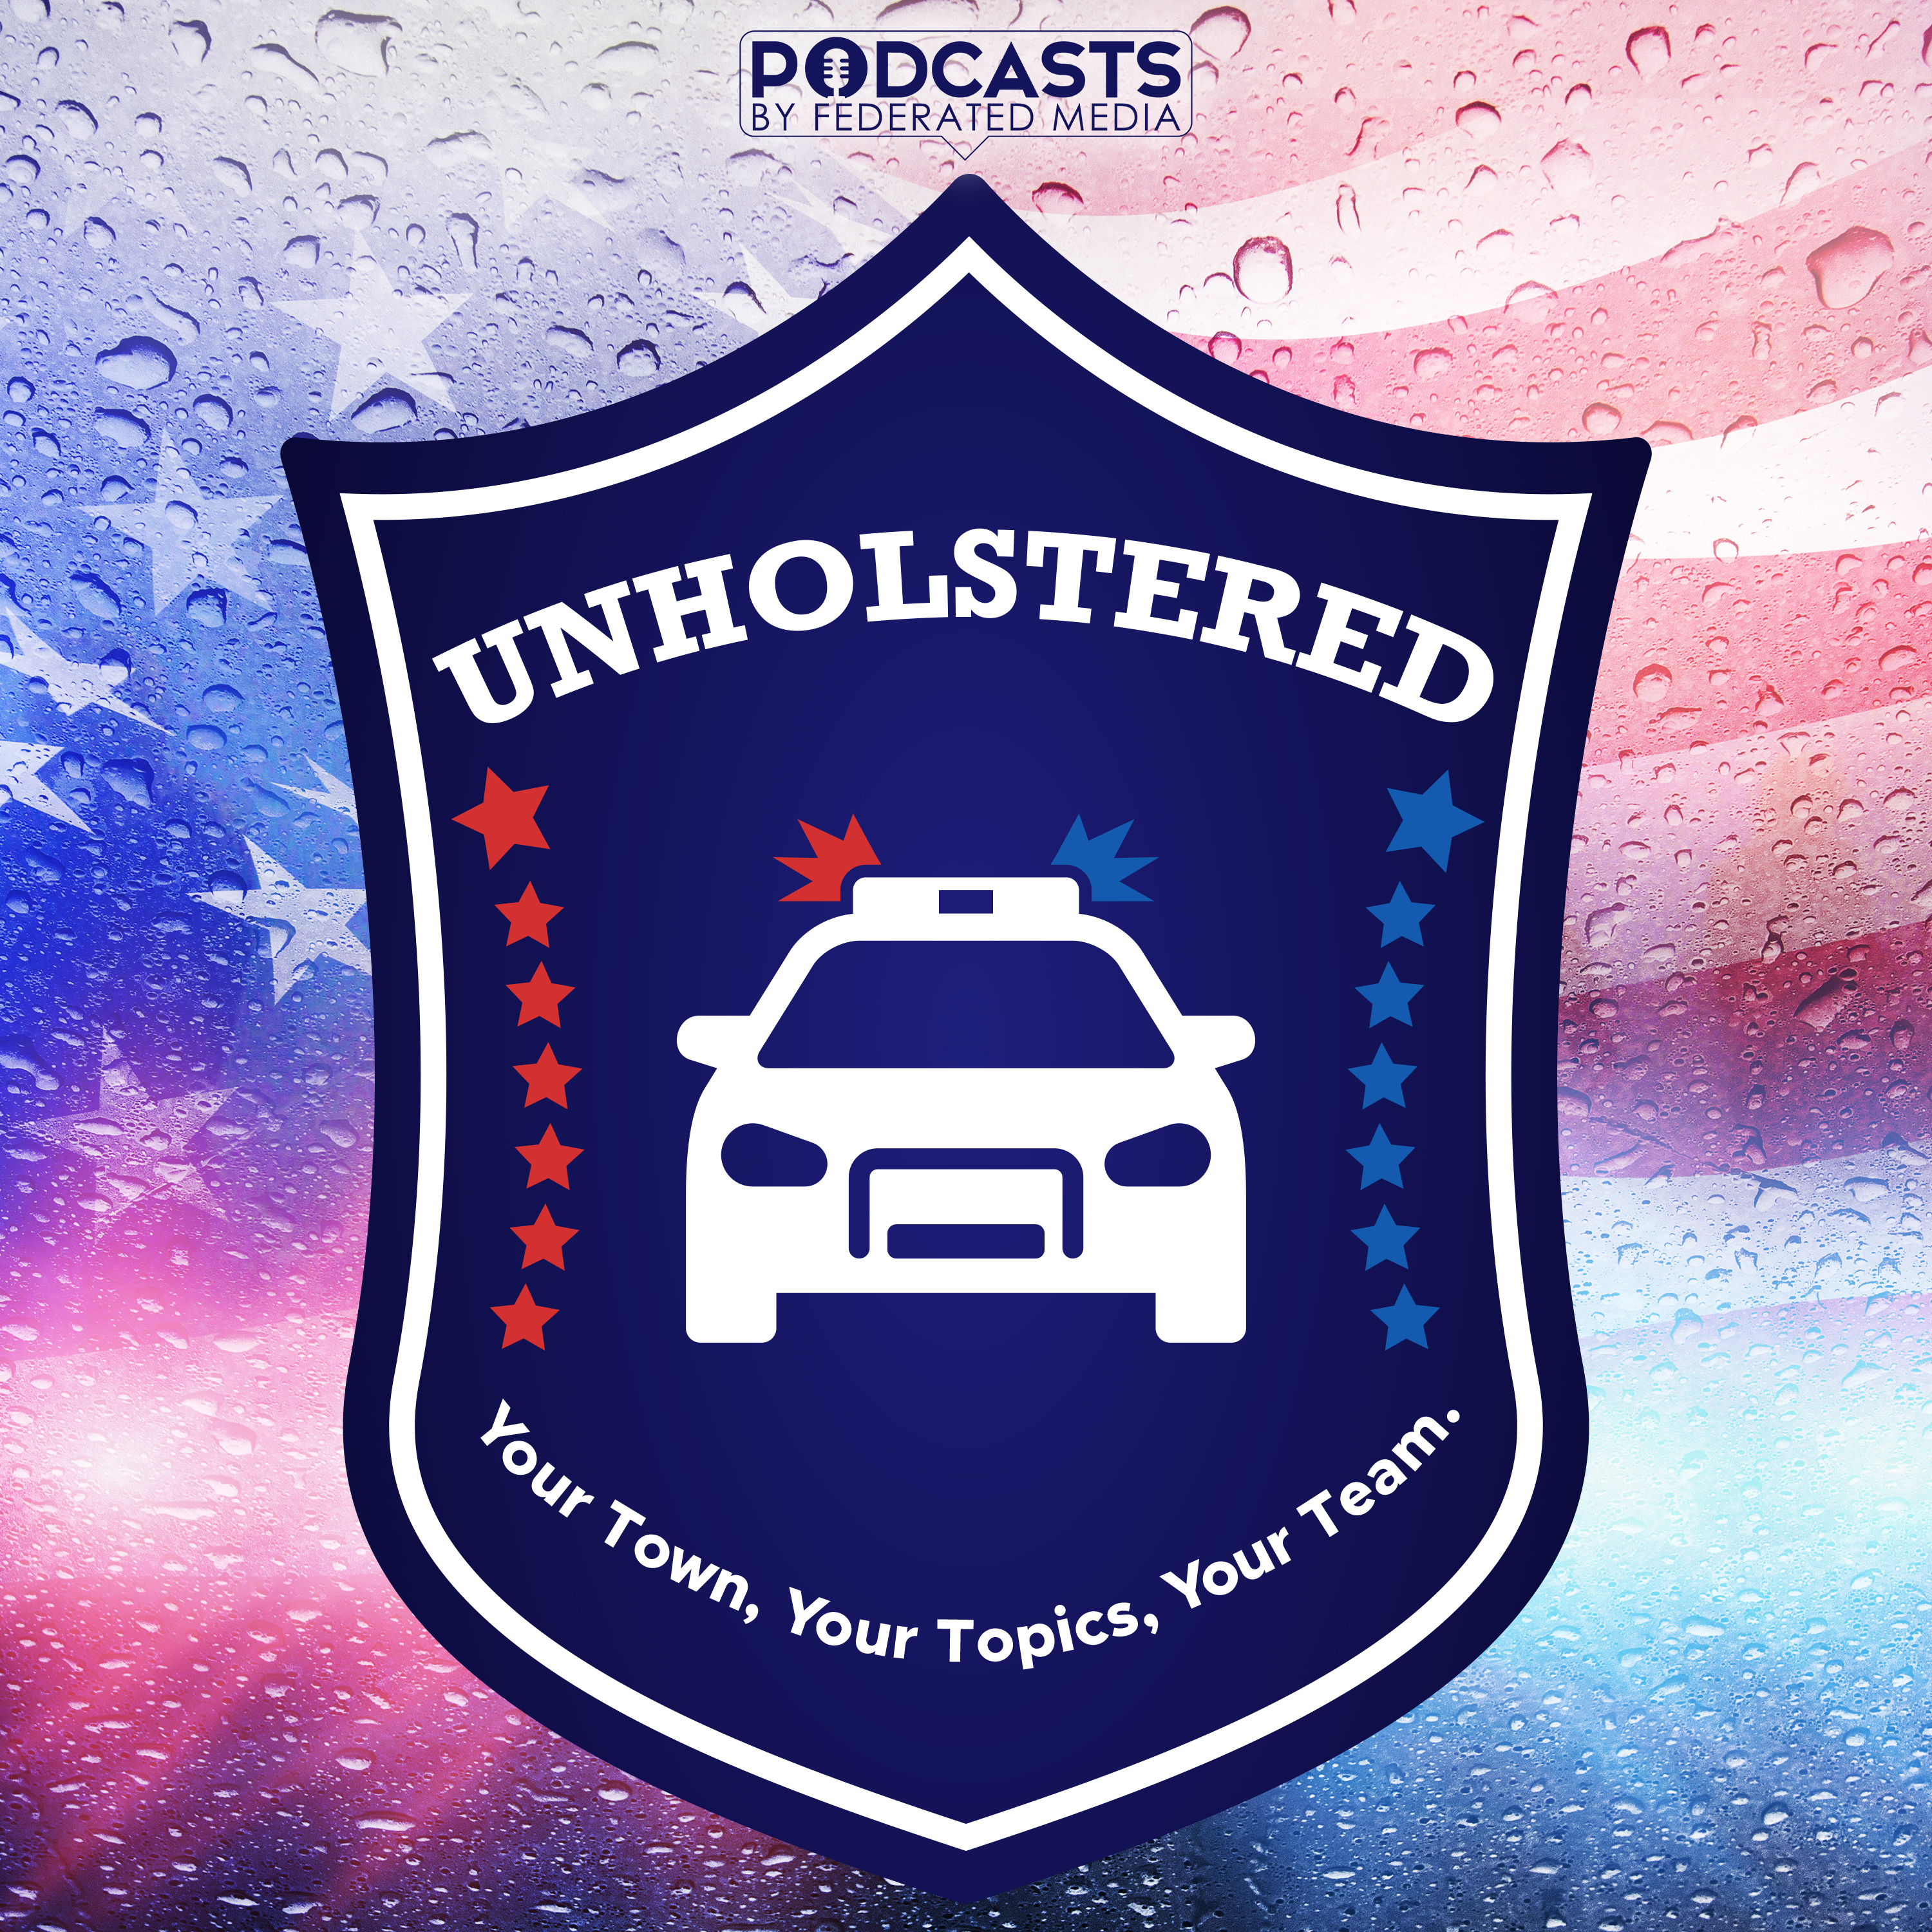 Ep 114: Mass Exodus of School Resource Officers from Schools